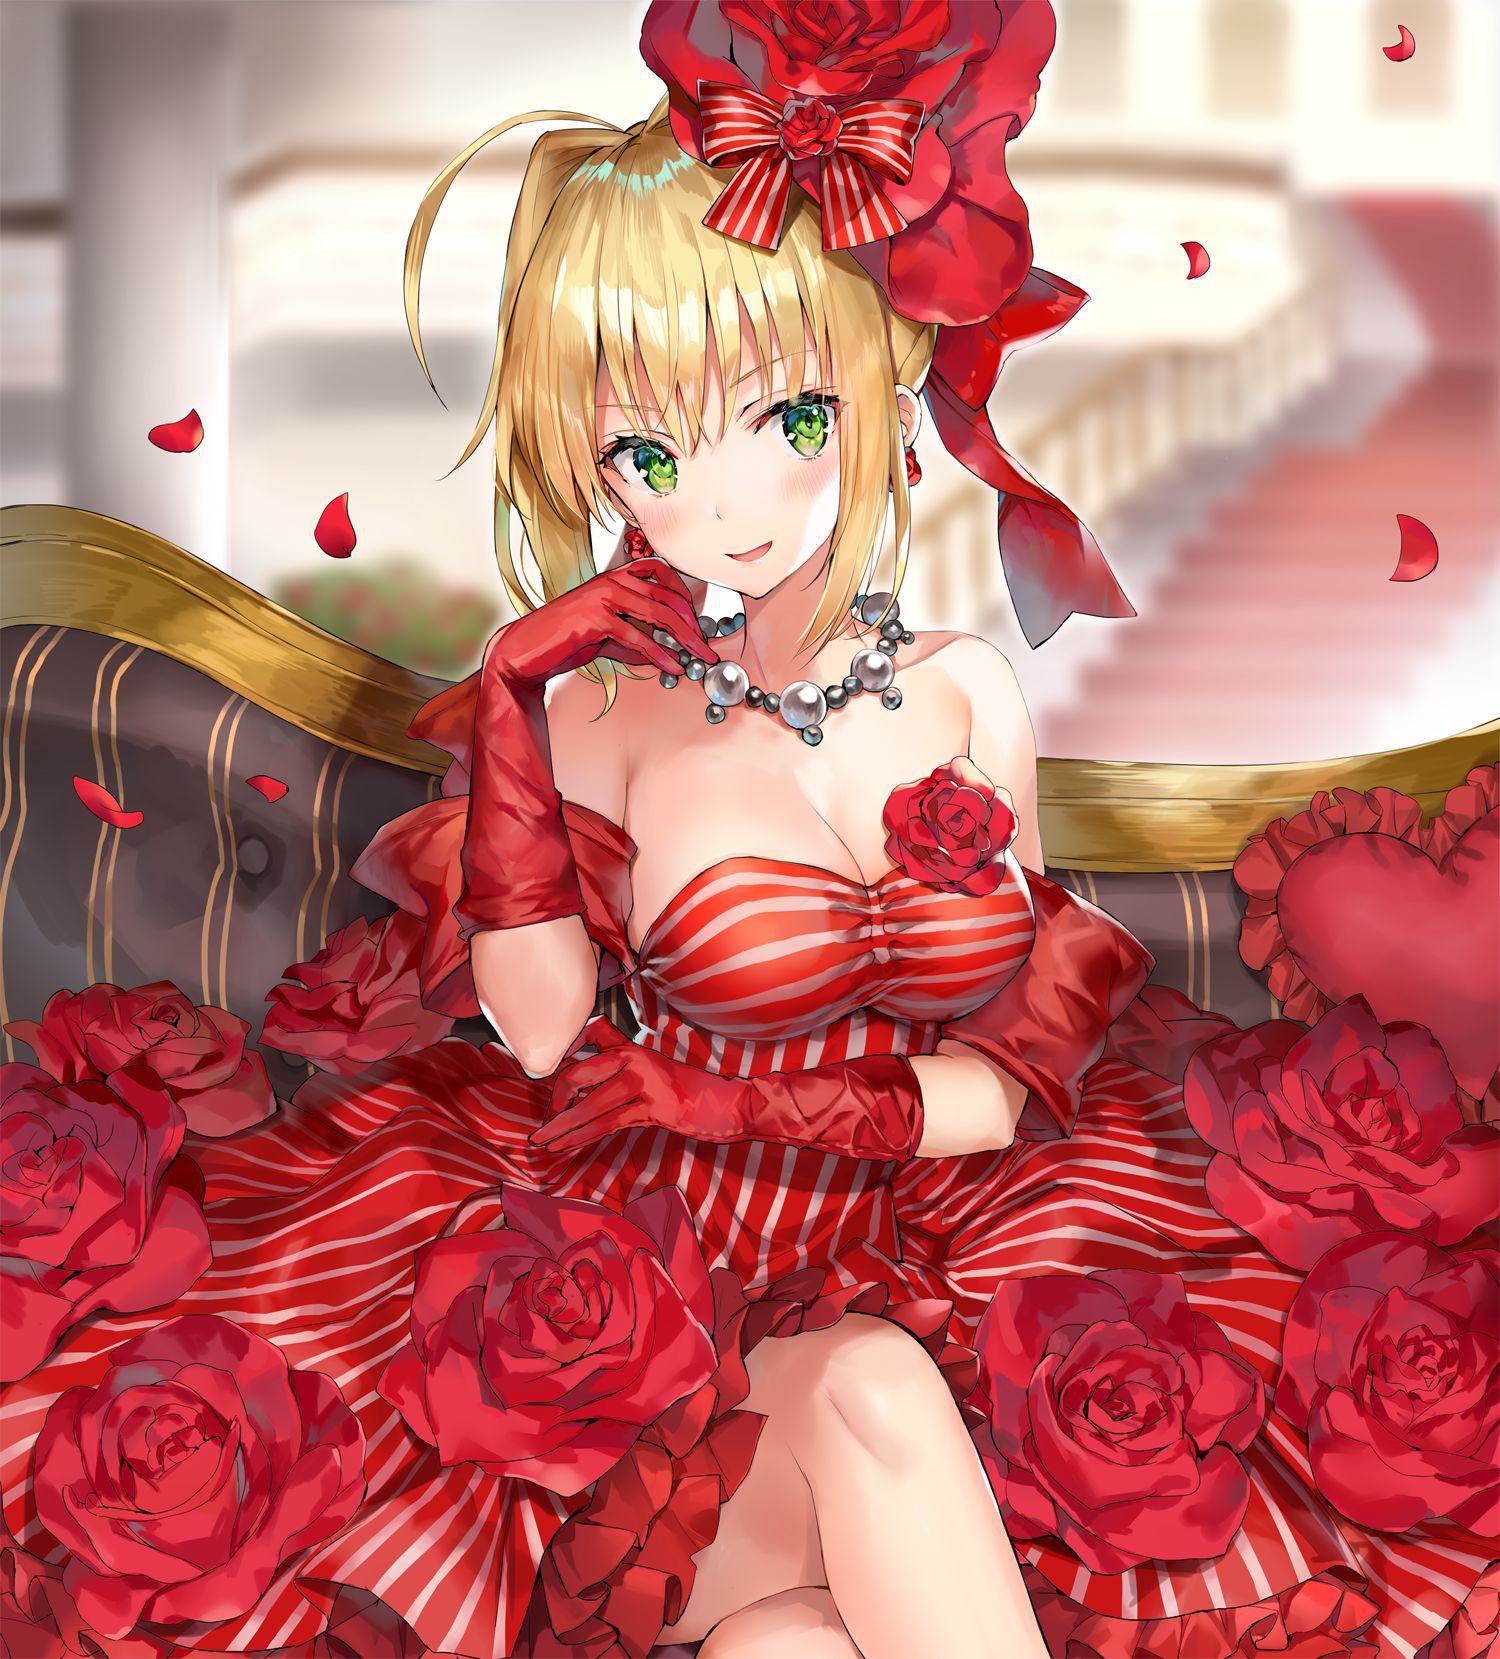 【Secondary】 Fate/Grand Order (Fate/EXTRA-CCC), Nero Claudius' love images summary! No.13 [20 sheets] 1